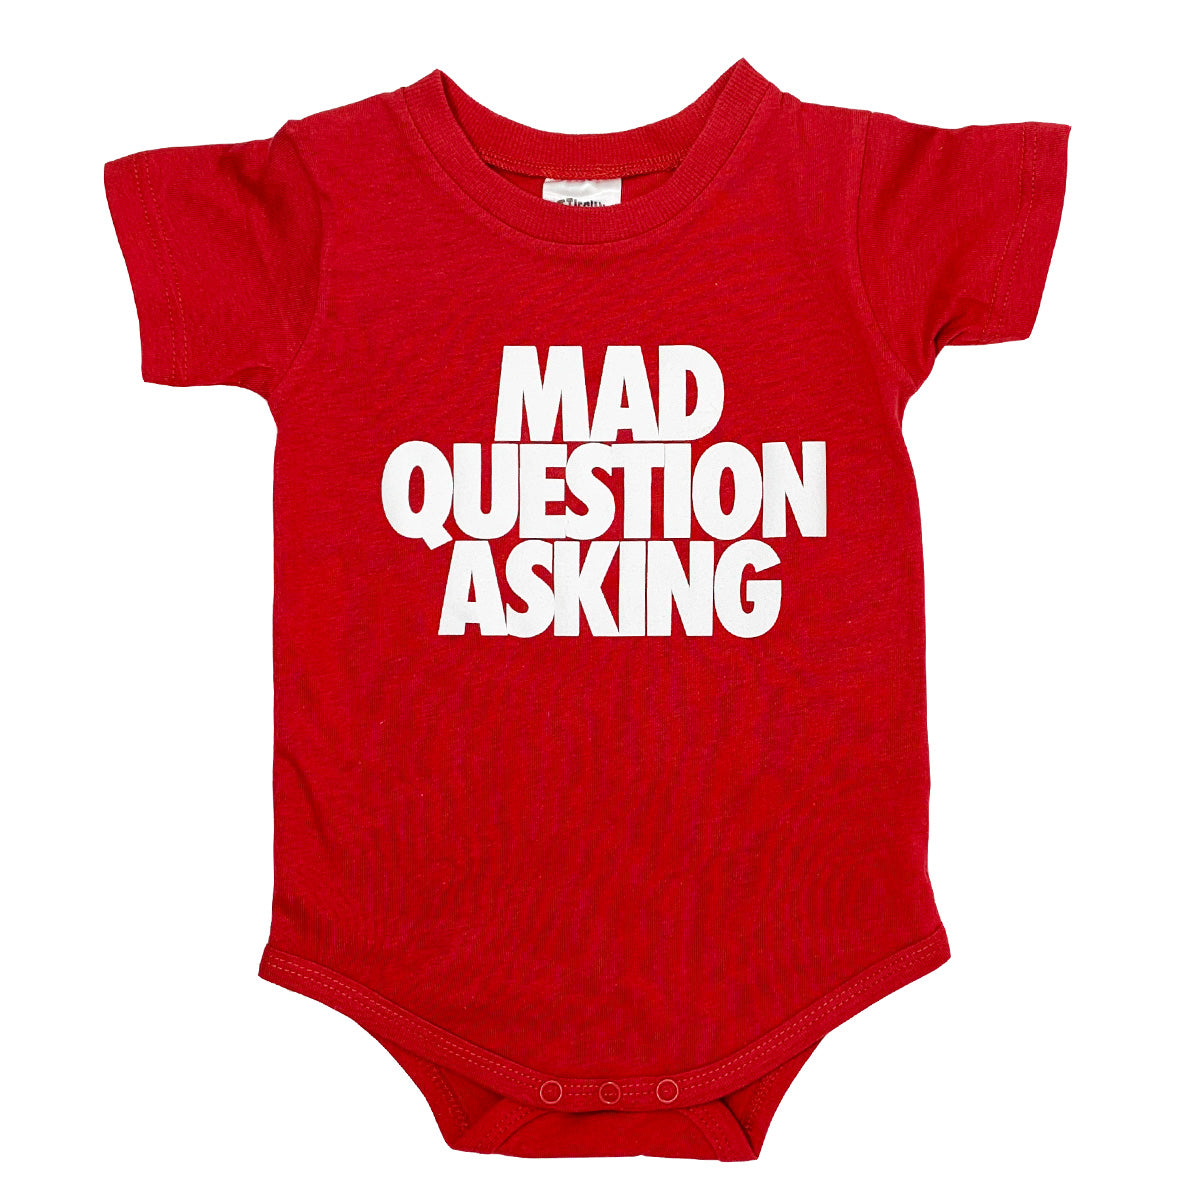 Mad Question Asking Onesie (Red)